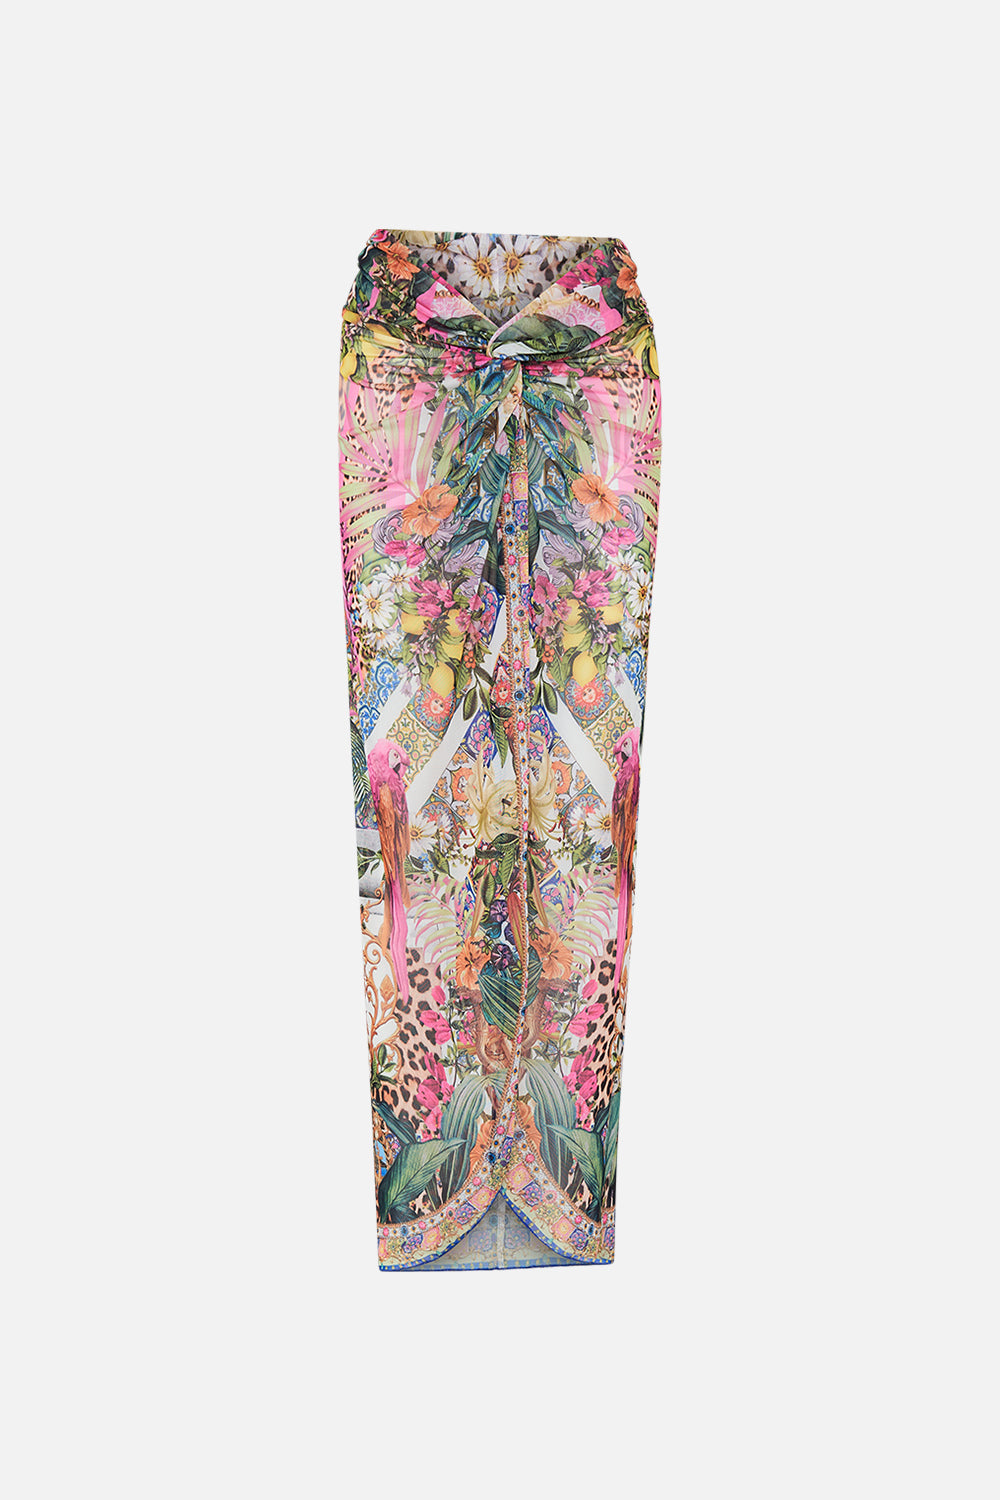 Product view of CAMILLA floral skirt in Flowers Of Neptune print